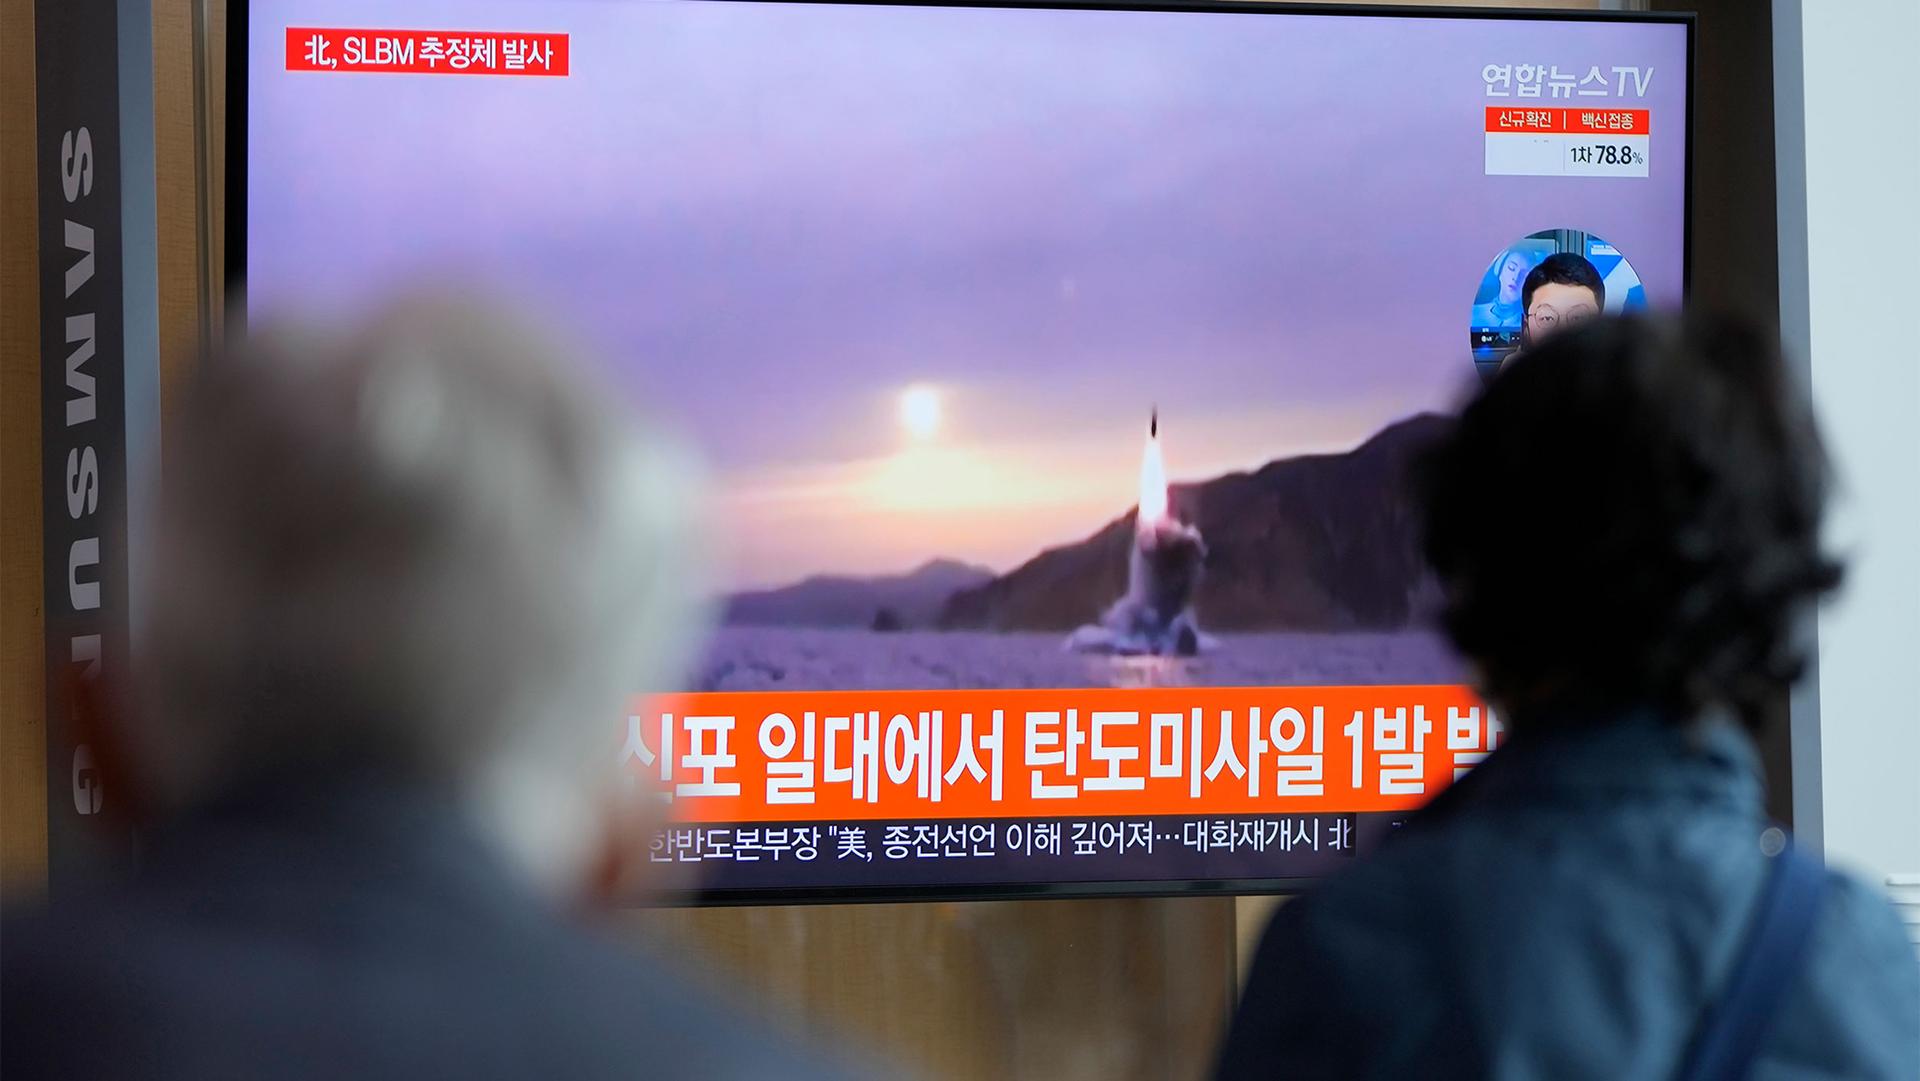 People watch a TV screen showing a news program reporting about North Korea's missile launch with file footage at a train station in Seoul, South Korea